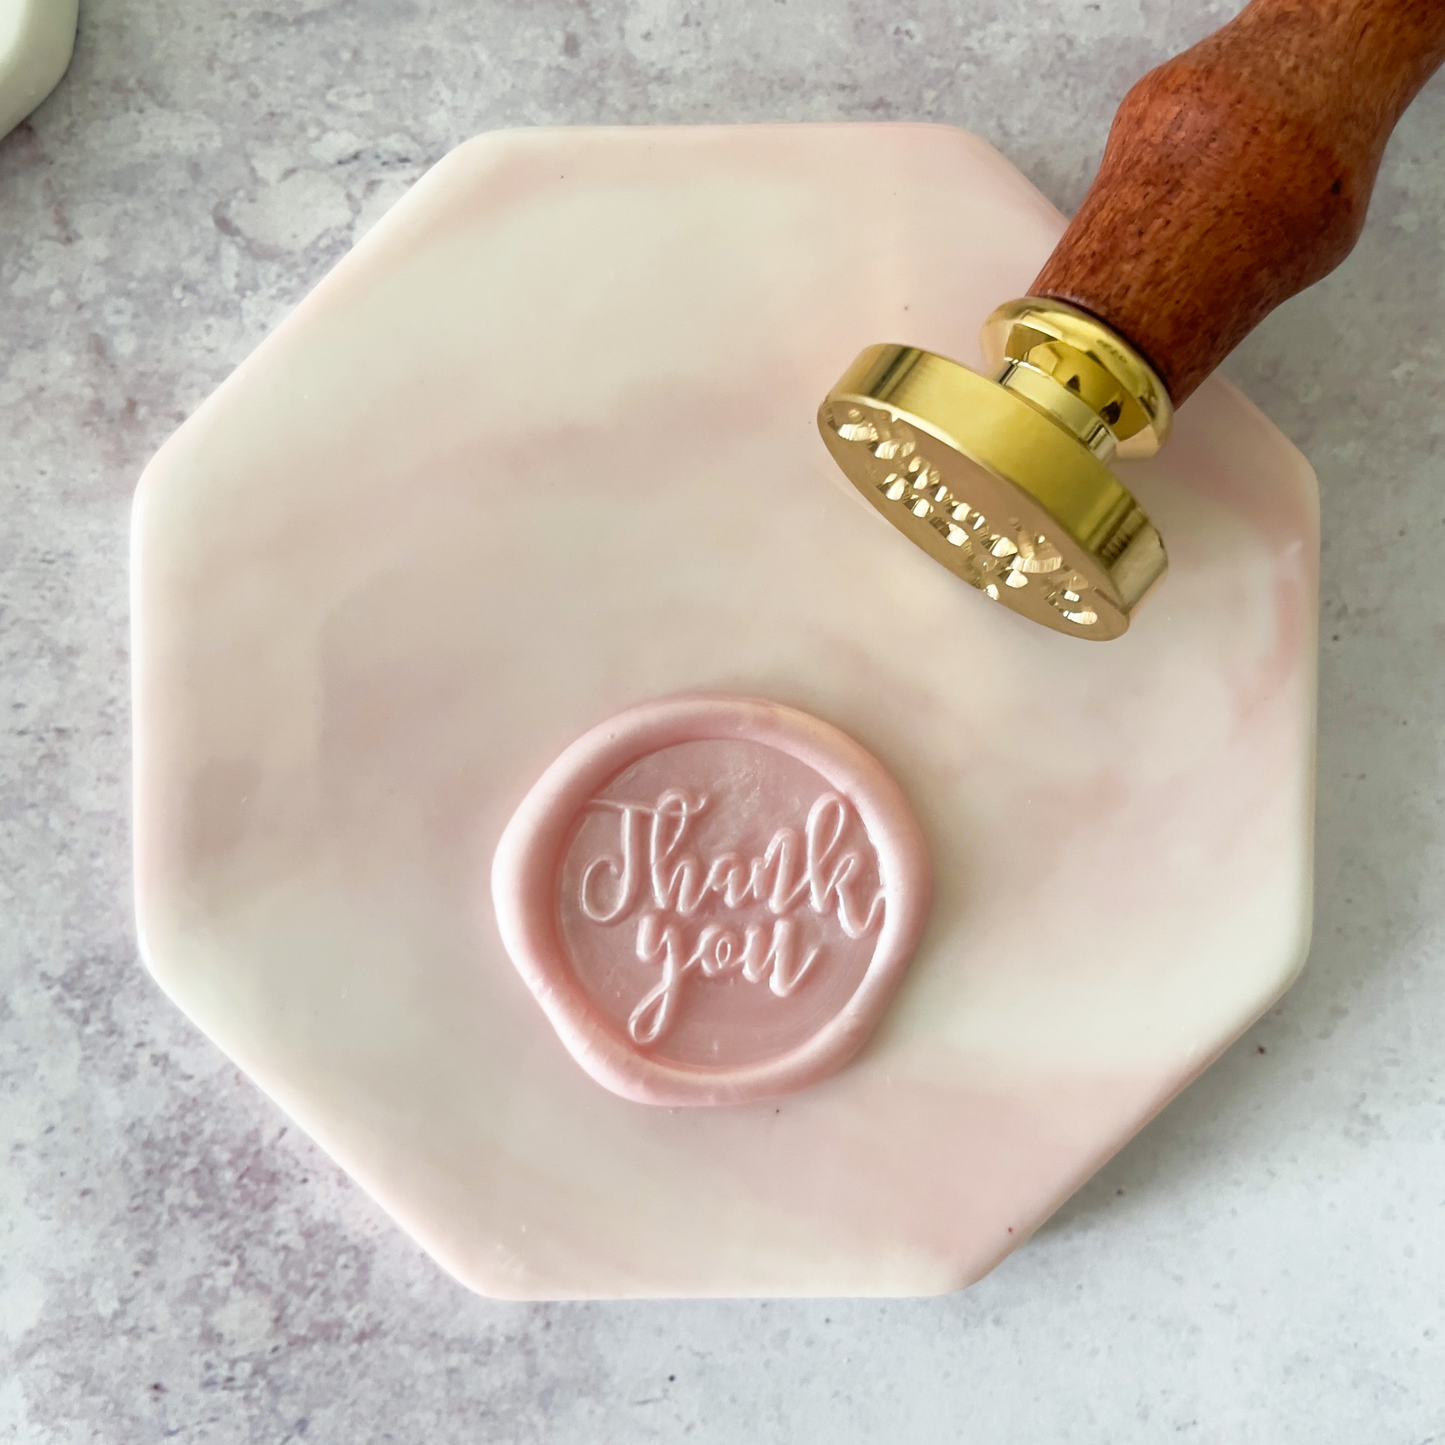 Wax stamp mat in pink.  Hexagon shaped ceramic tile for making wax seals.  by The Natural Paper Company